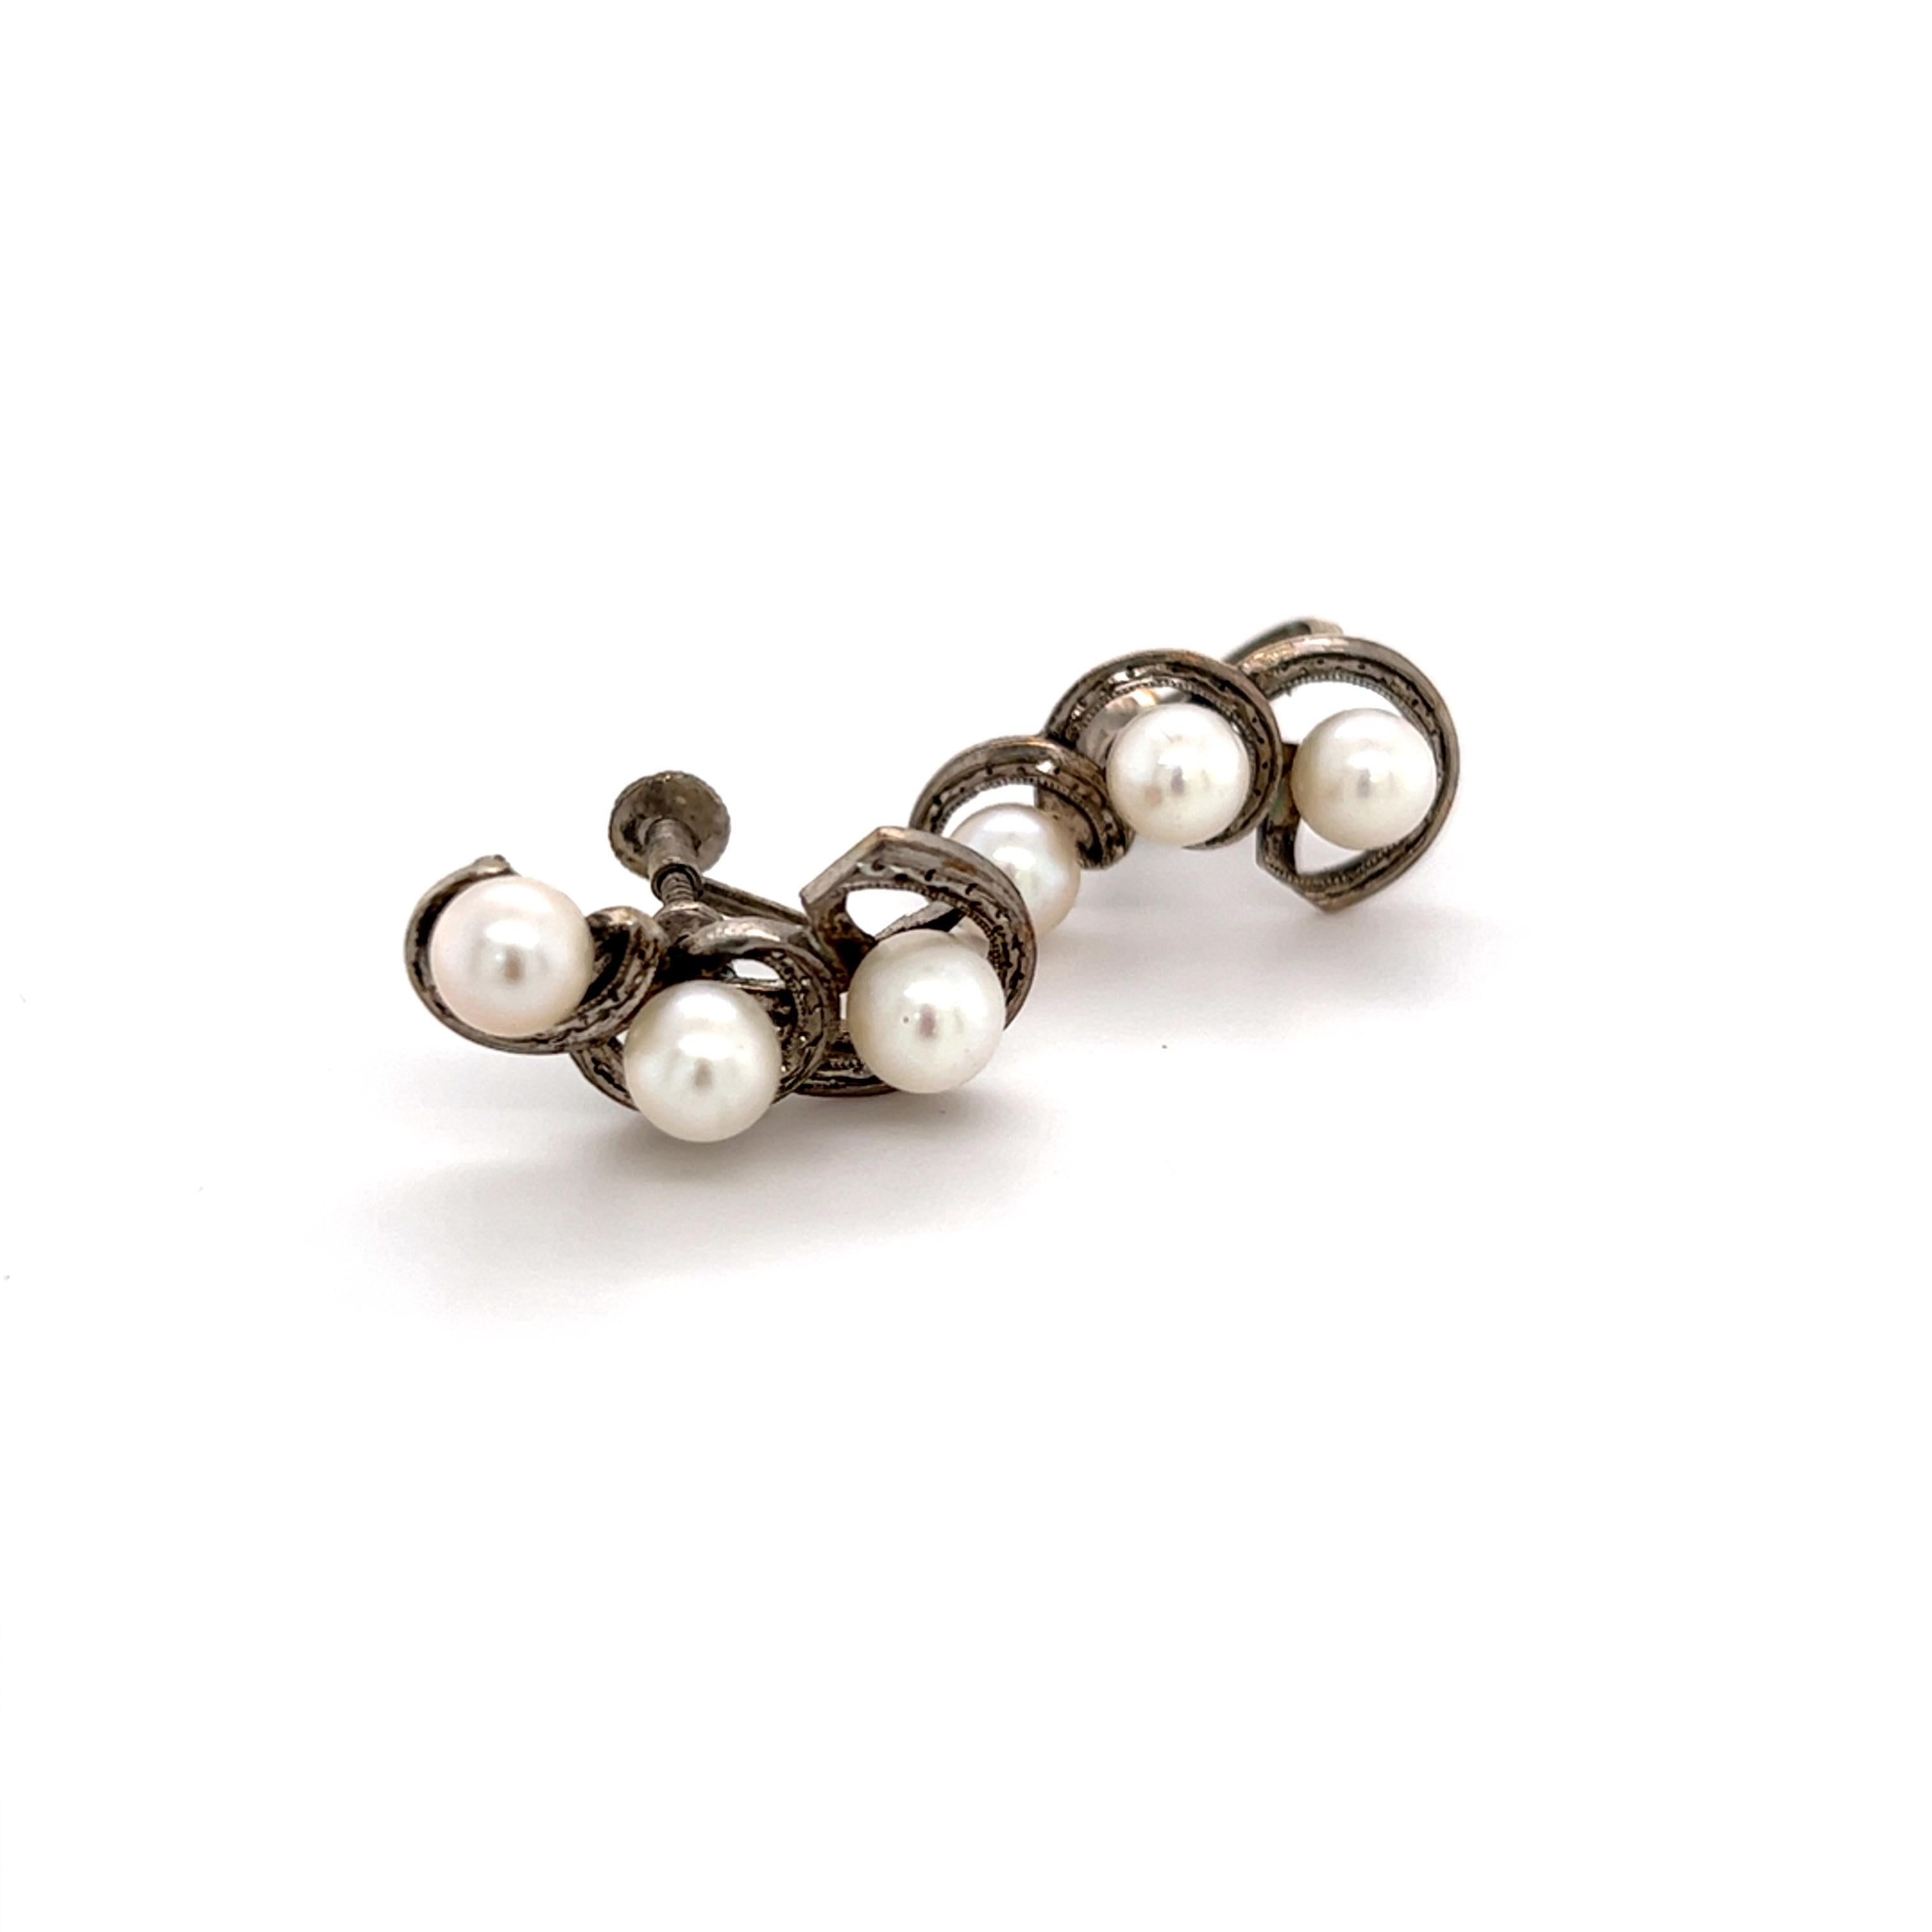 Mikimoto Estate Akoya Pearl Earrings Sterling Silver 5.5 mm 5.1 Grams In Good Condition For Sale In Brooklyn, NY